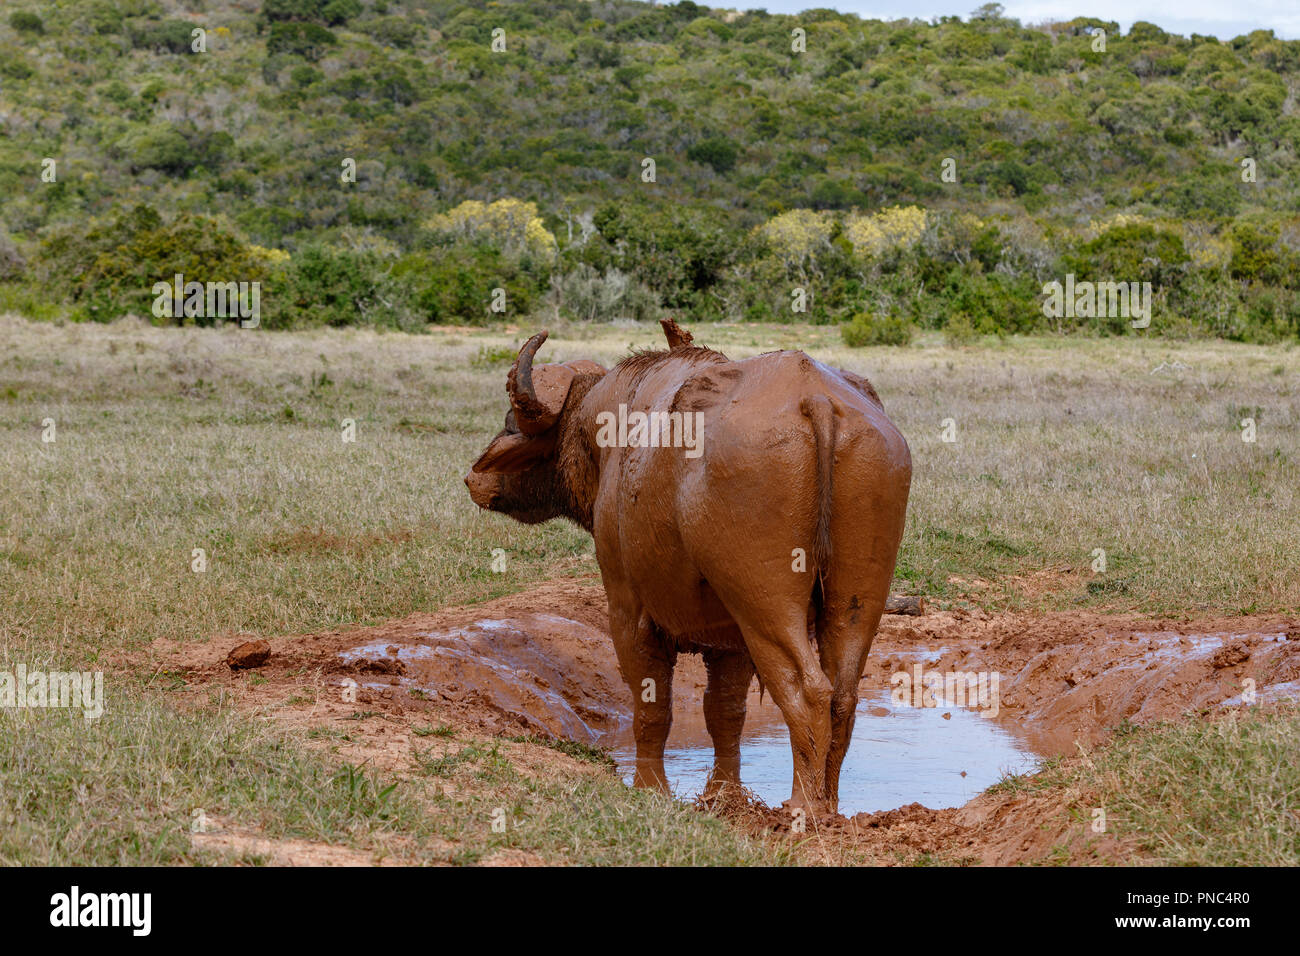 Buffalo standing at his mud bath in the field Stock Photo